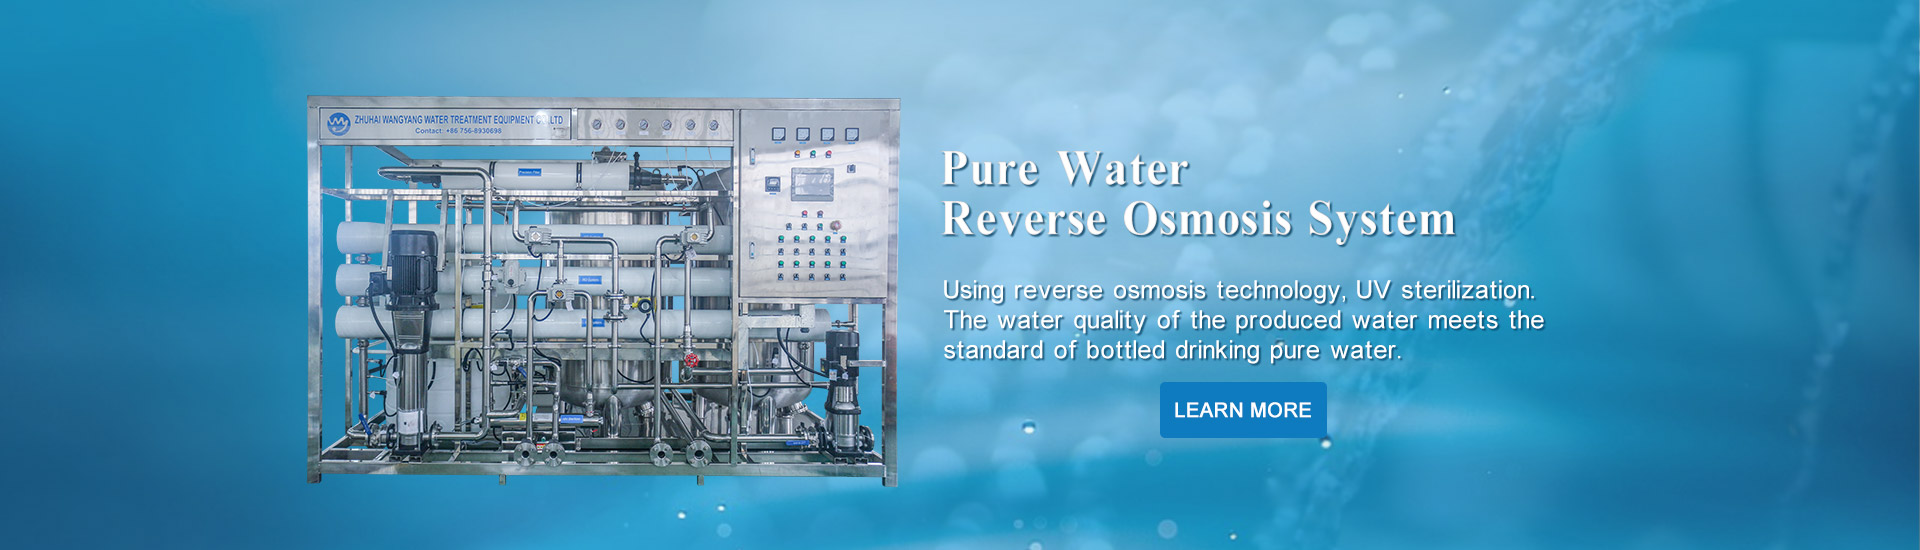 Pure Water RO system